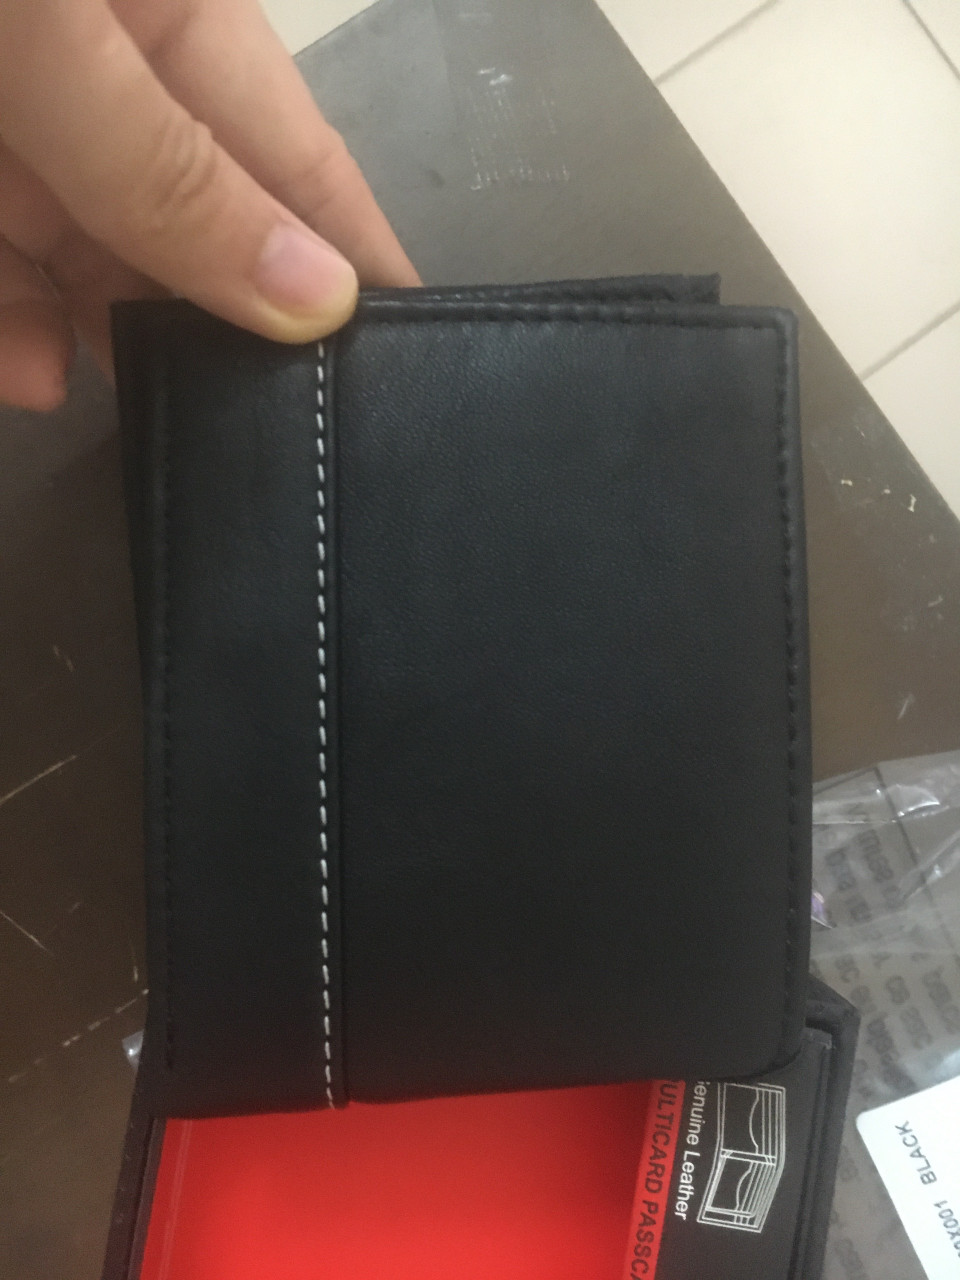 Guess Leather Passcase Wallet in Black for Men